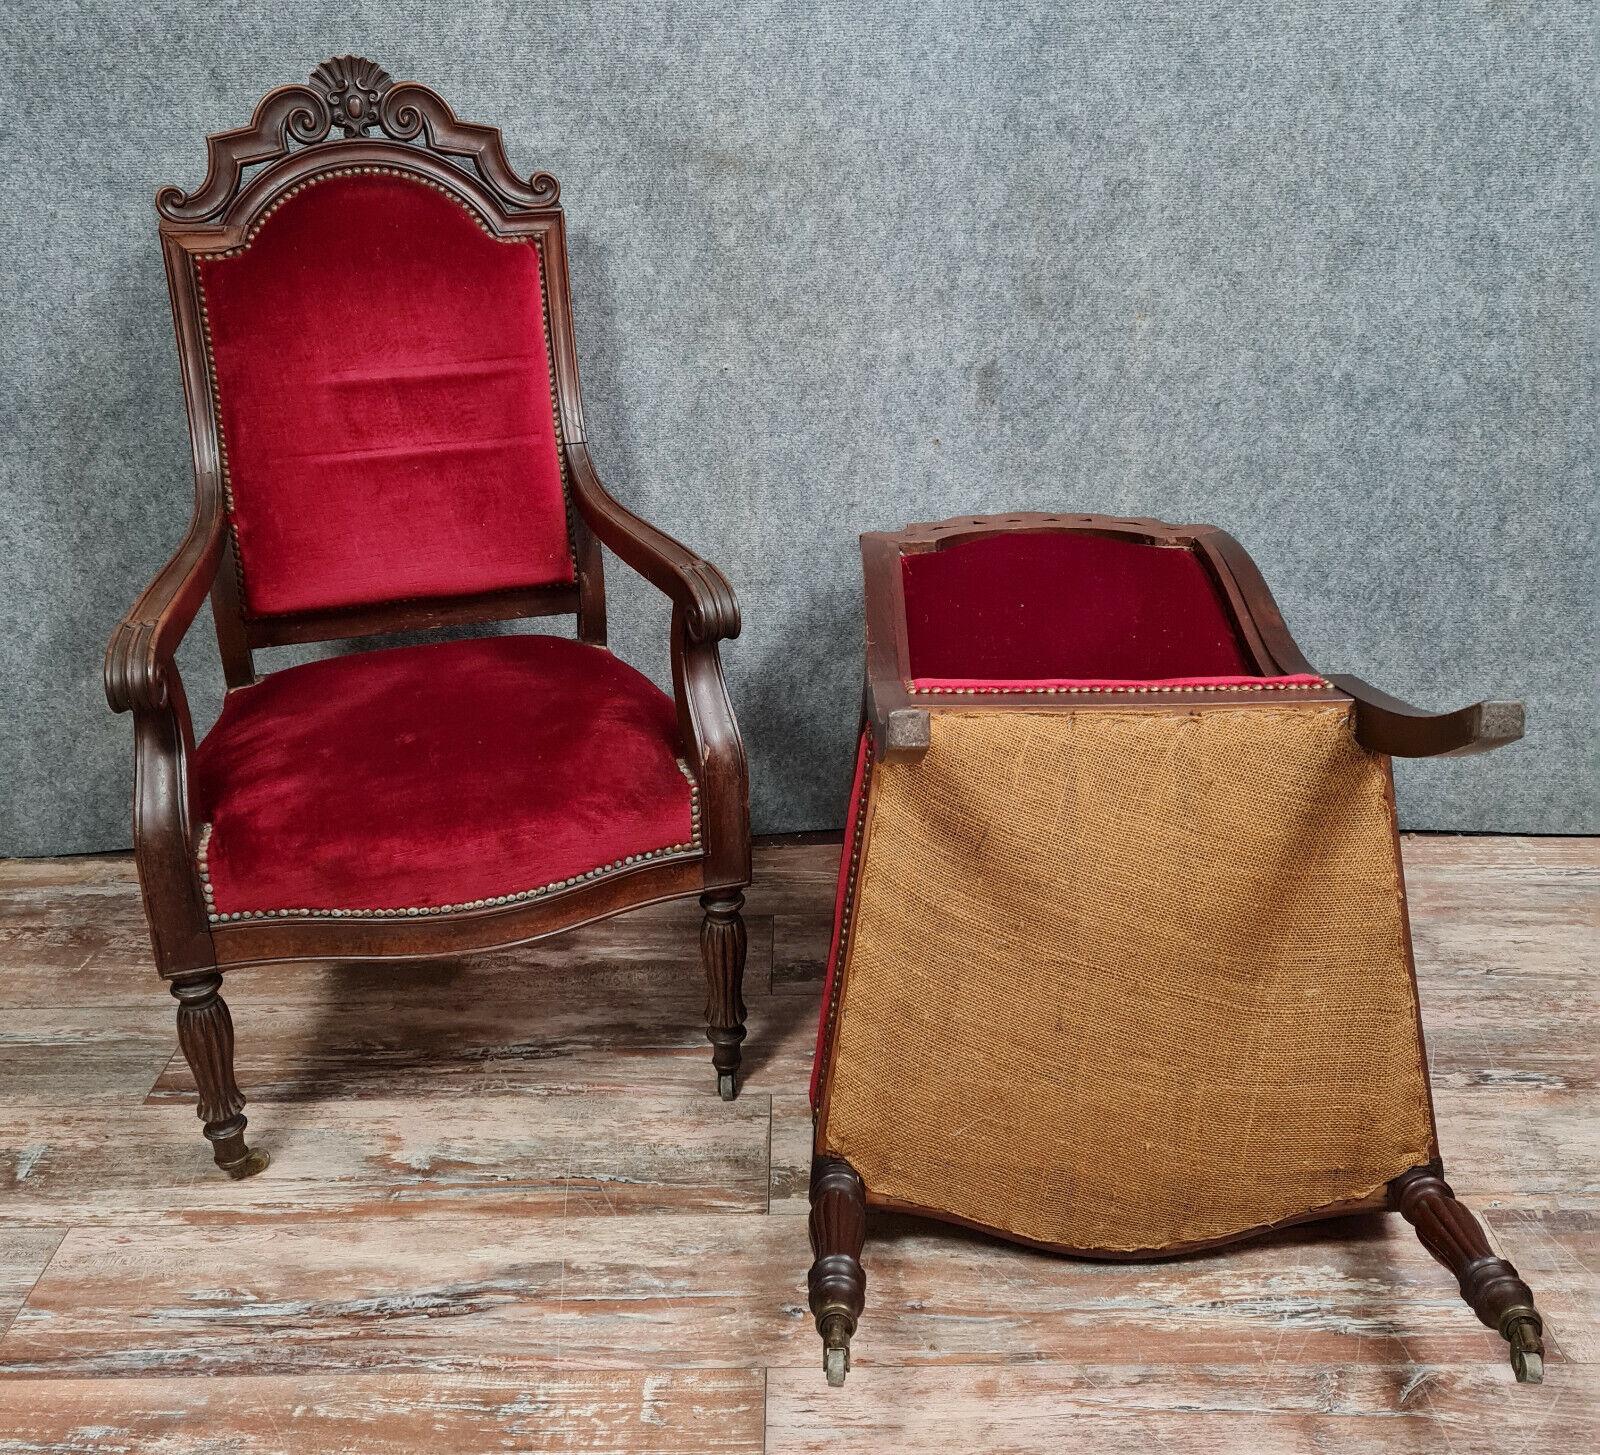 Exquisite Set of 4 Restauration Period Mahogany Chairs, circa 1820 -1X32 For Sale 4